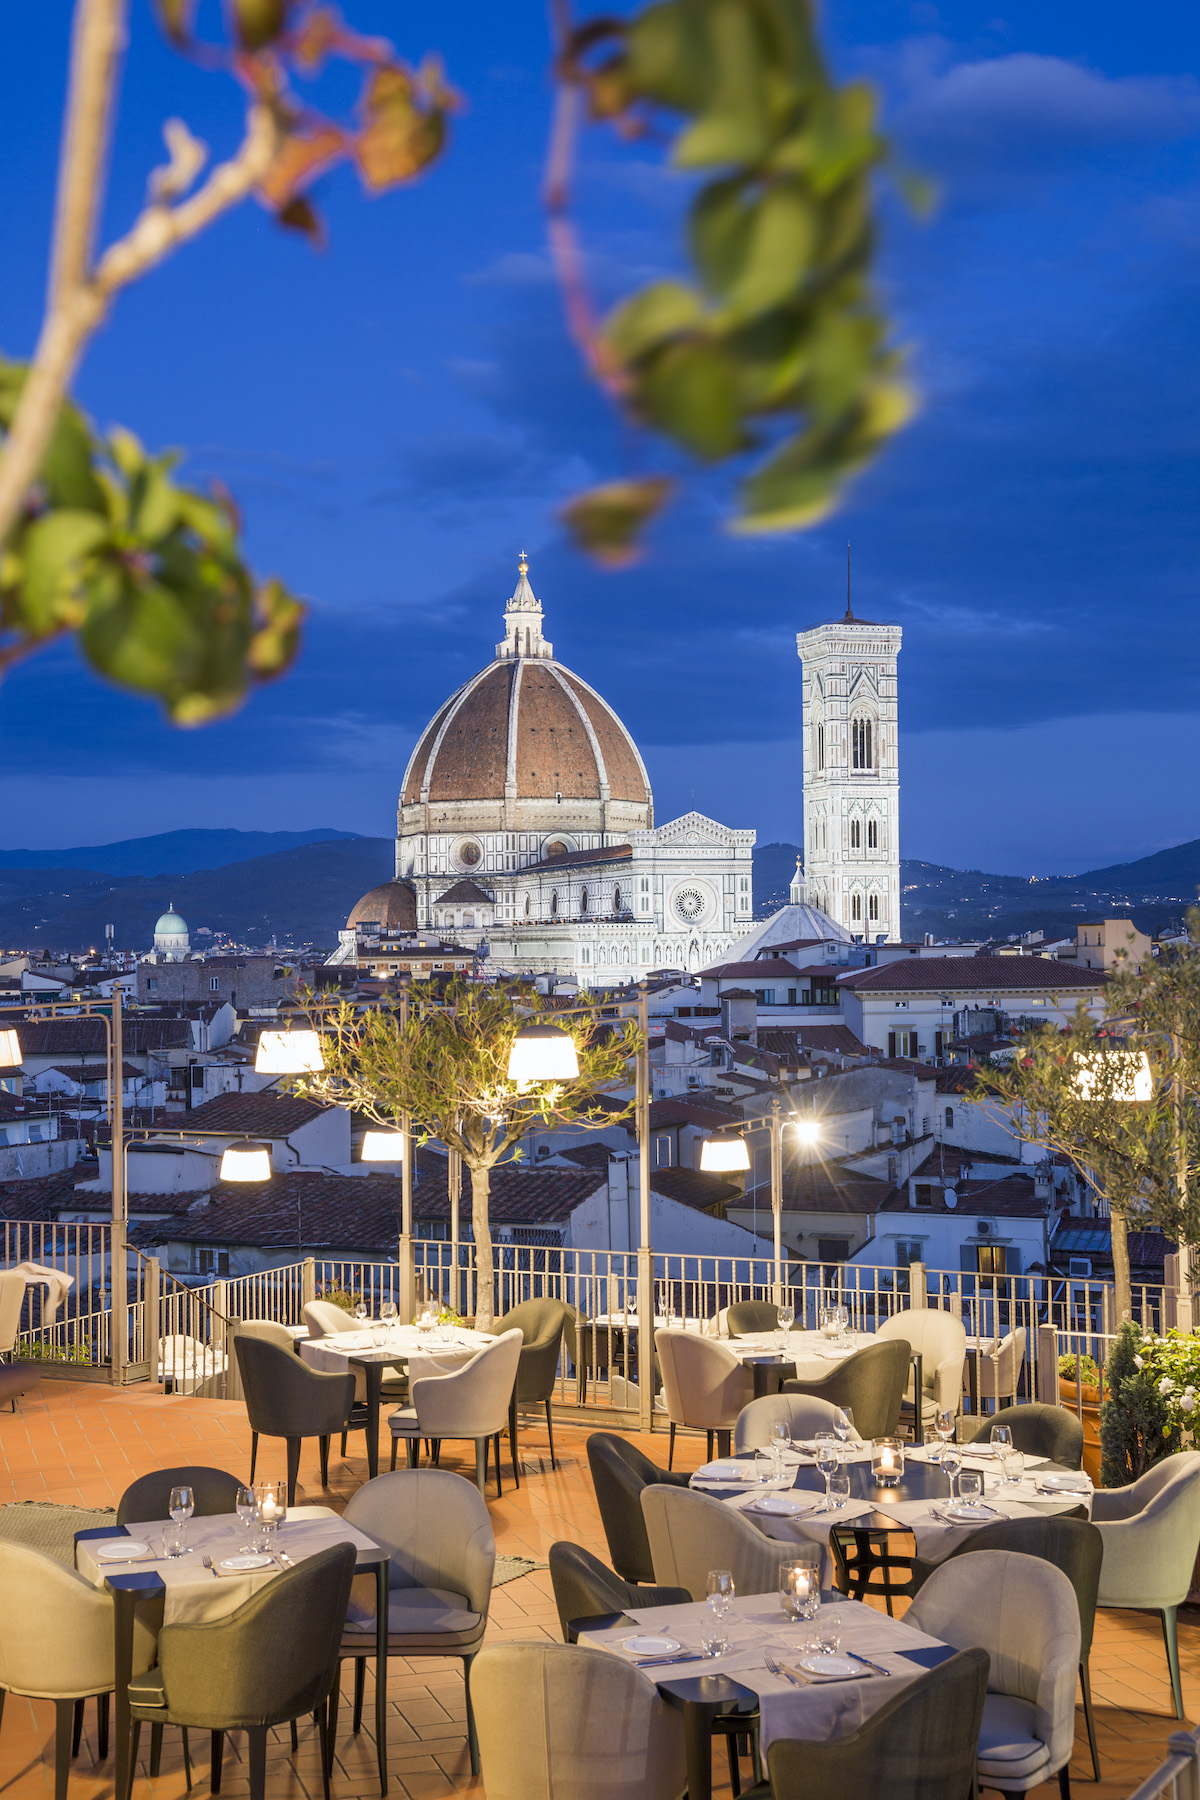 View of the Florence cathedral dome from a rooftop bar at night